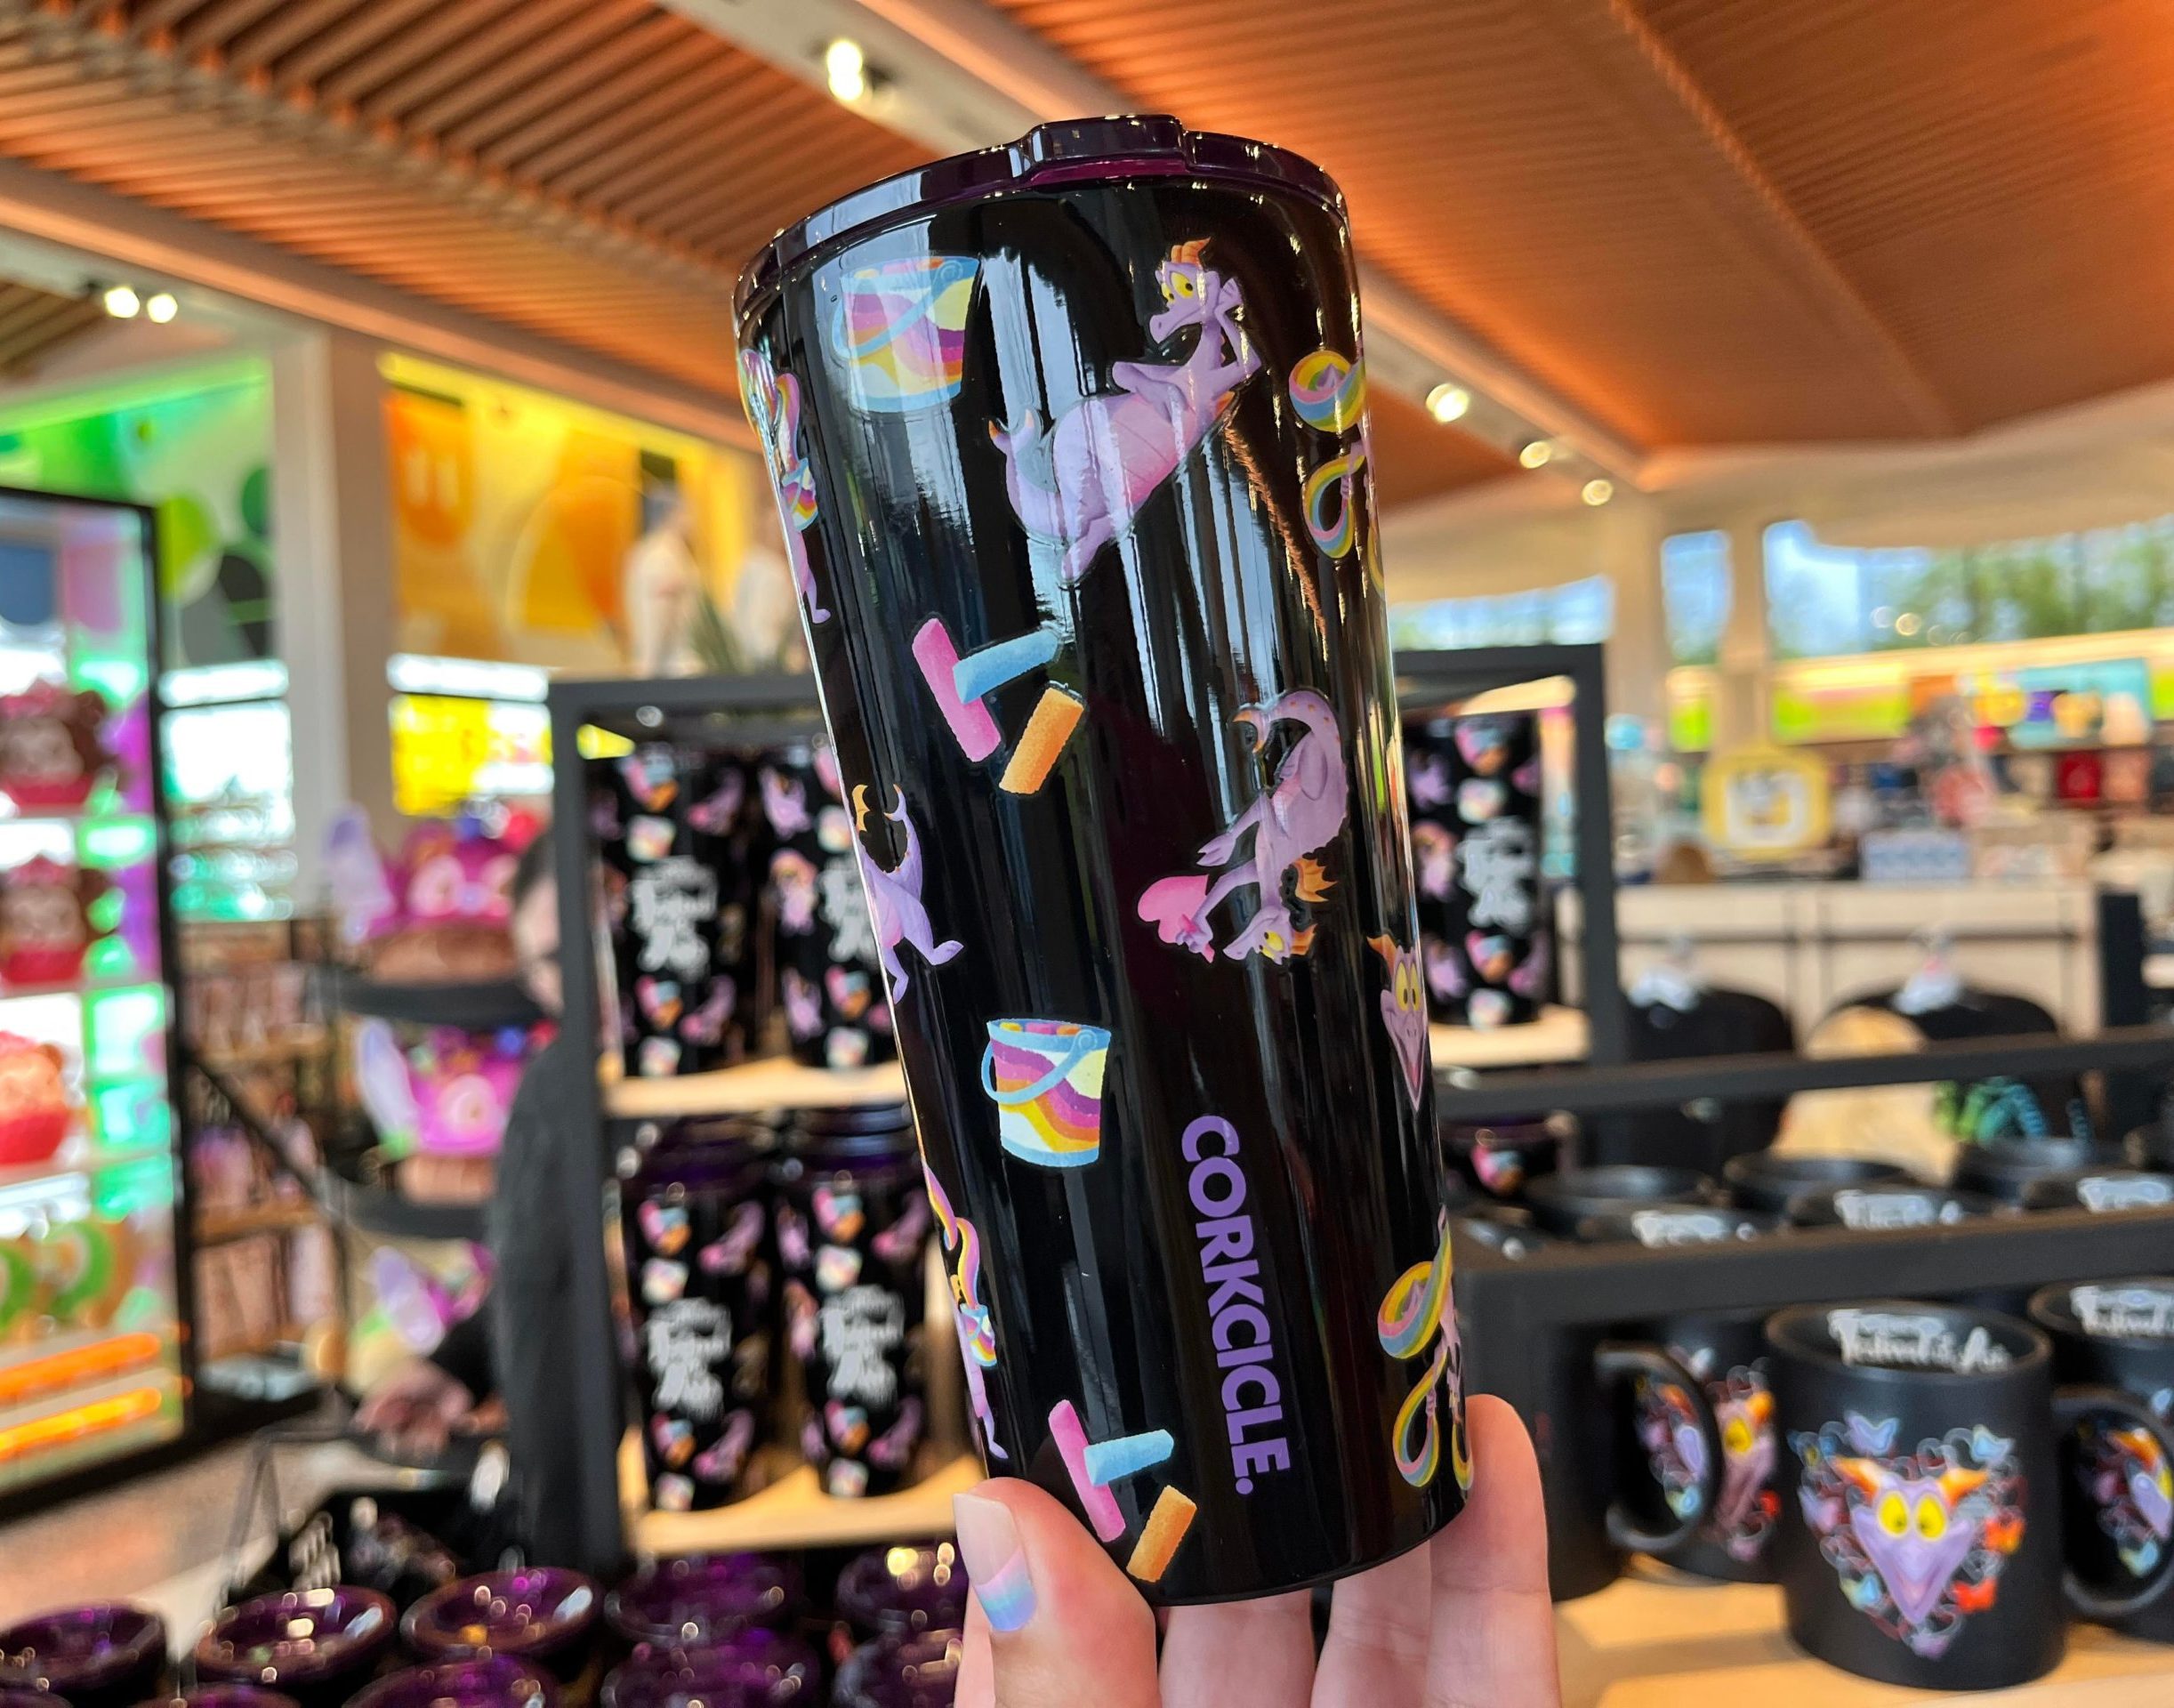 PHOTOS: Join Us at the Grand Opening of Corkcicle in Disney